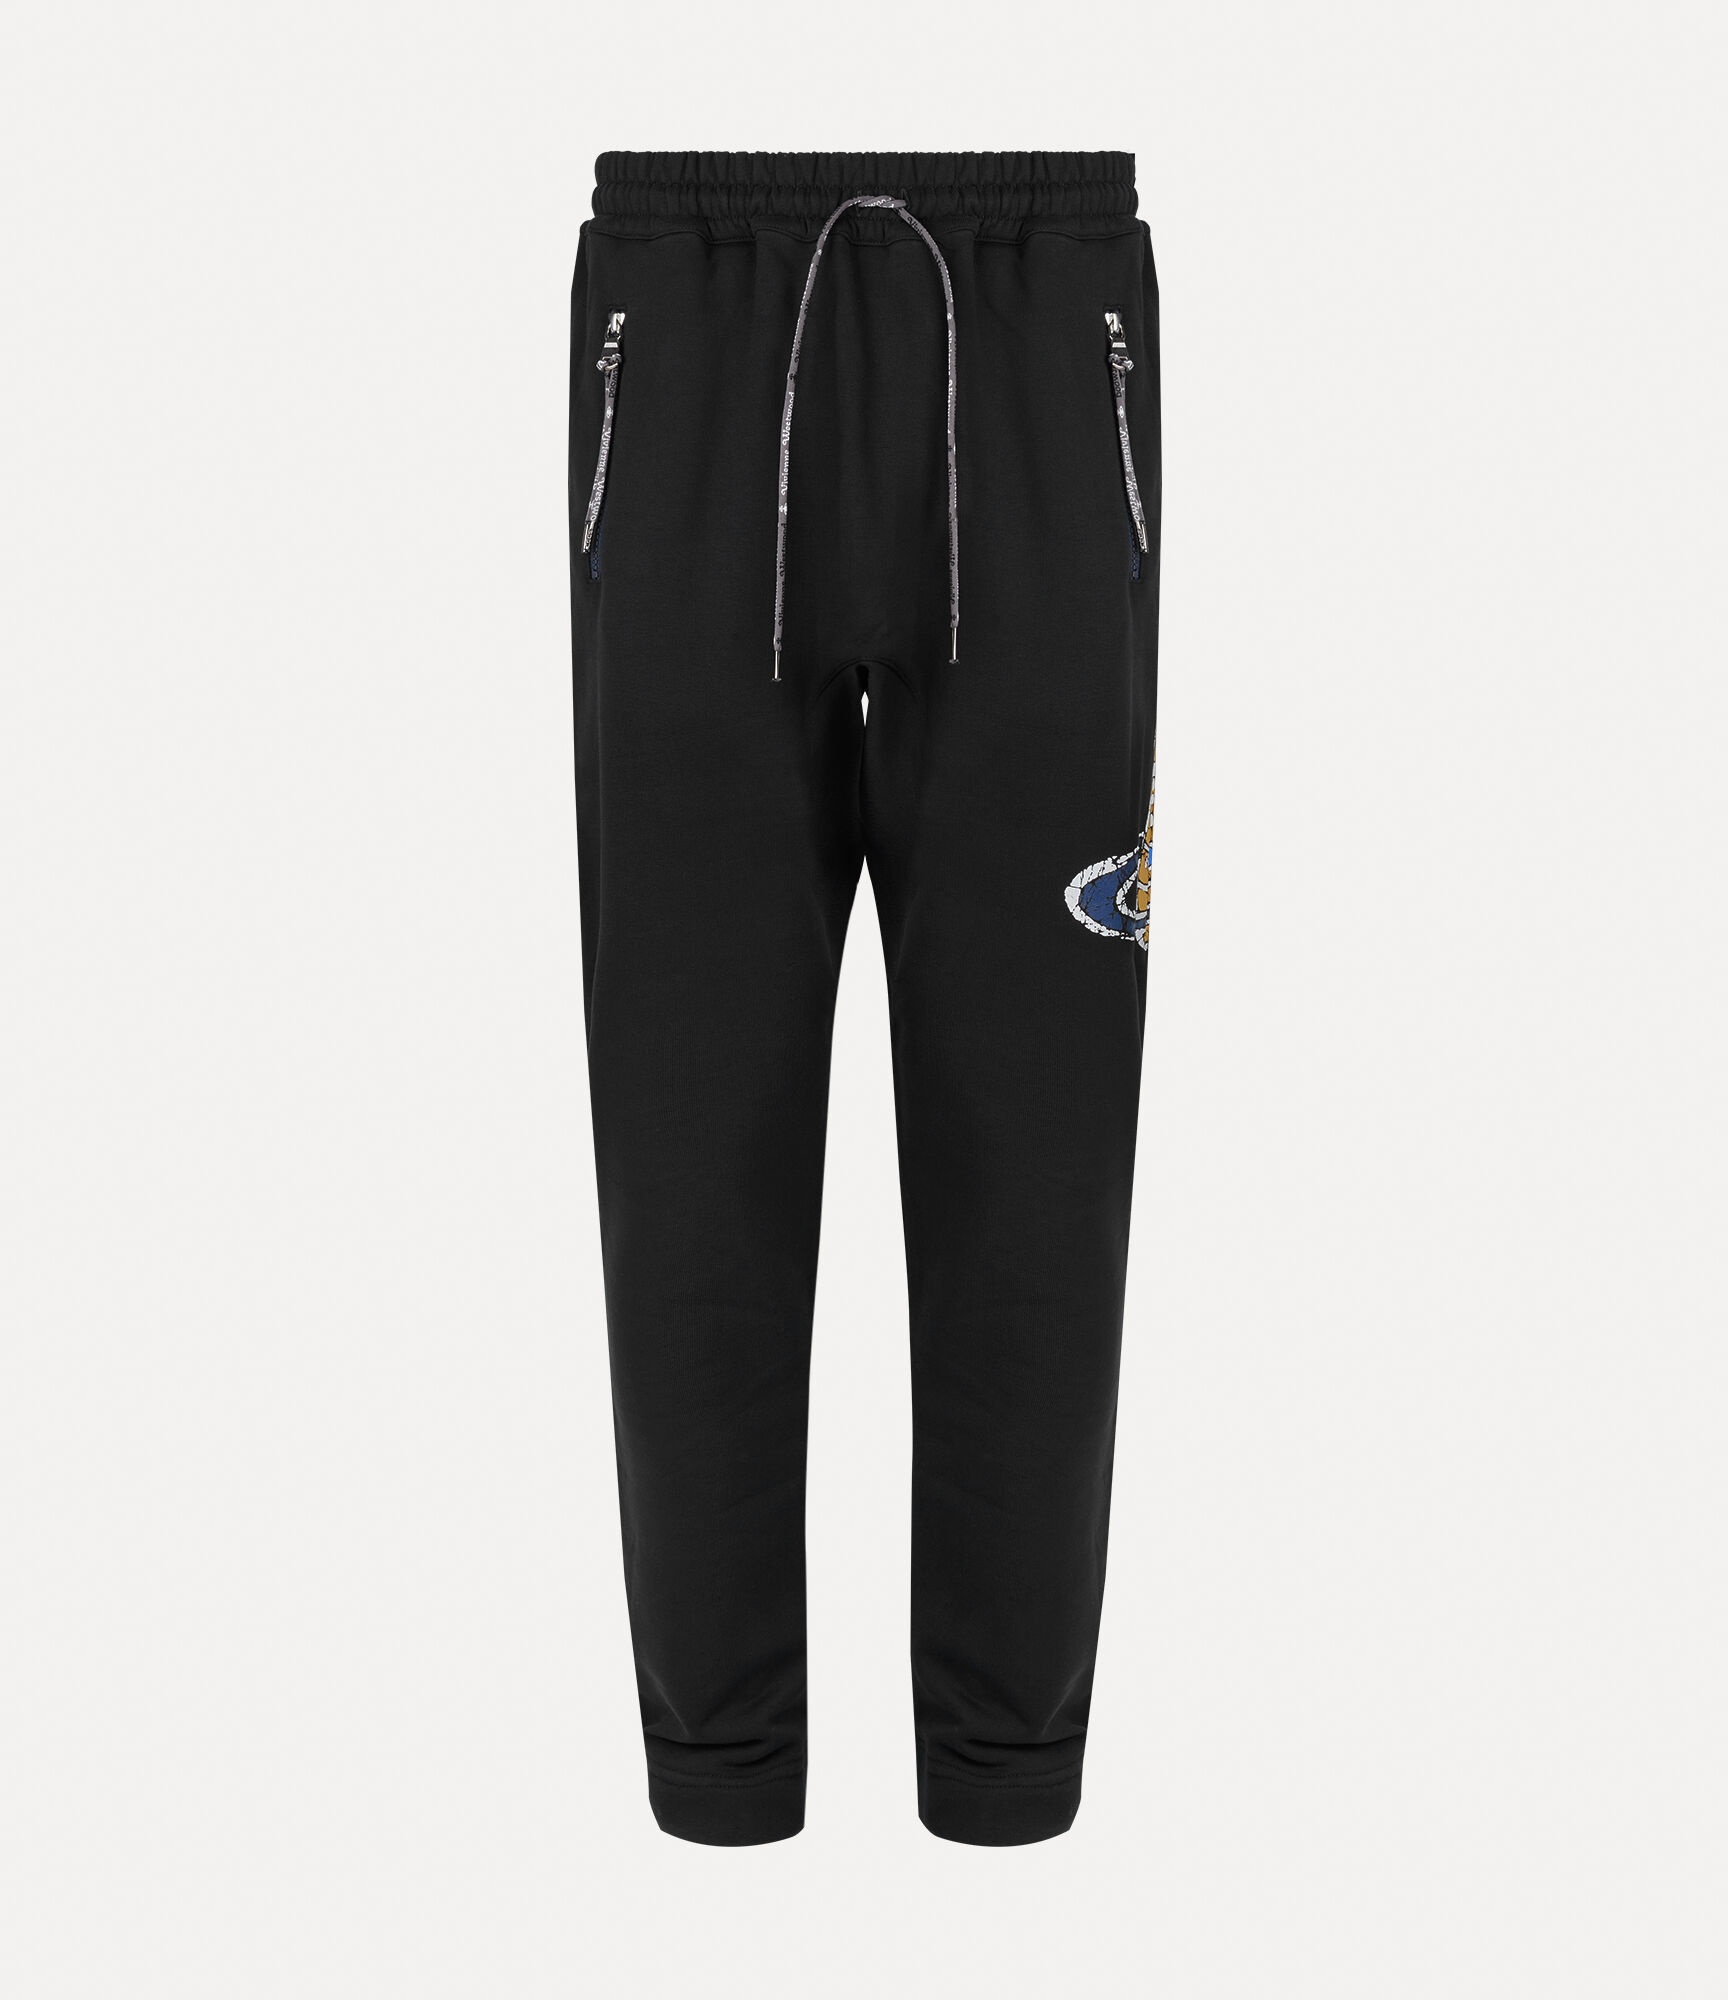 TIME MACHINE FOOTBALL TROUSERS - 1